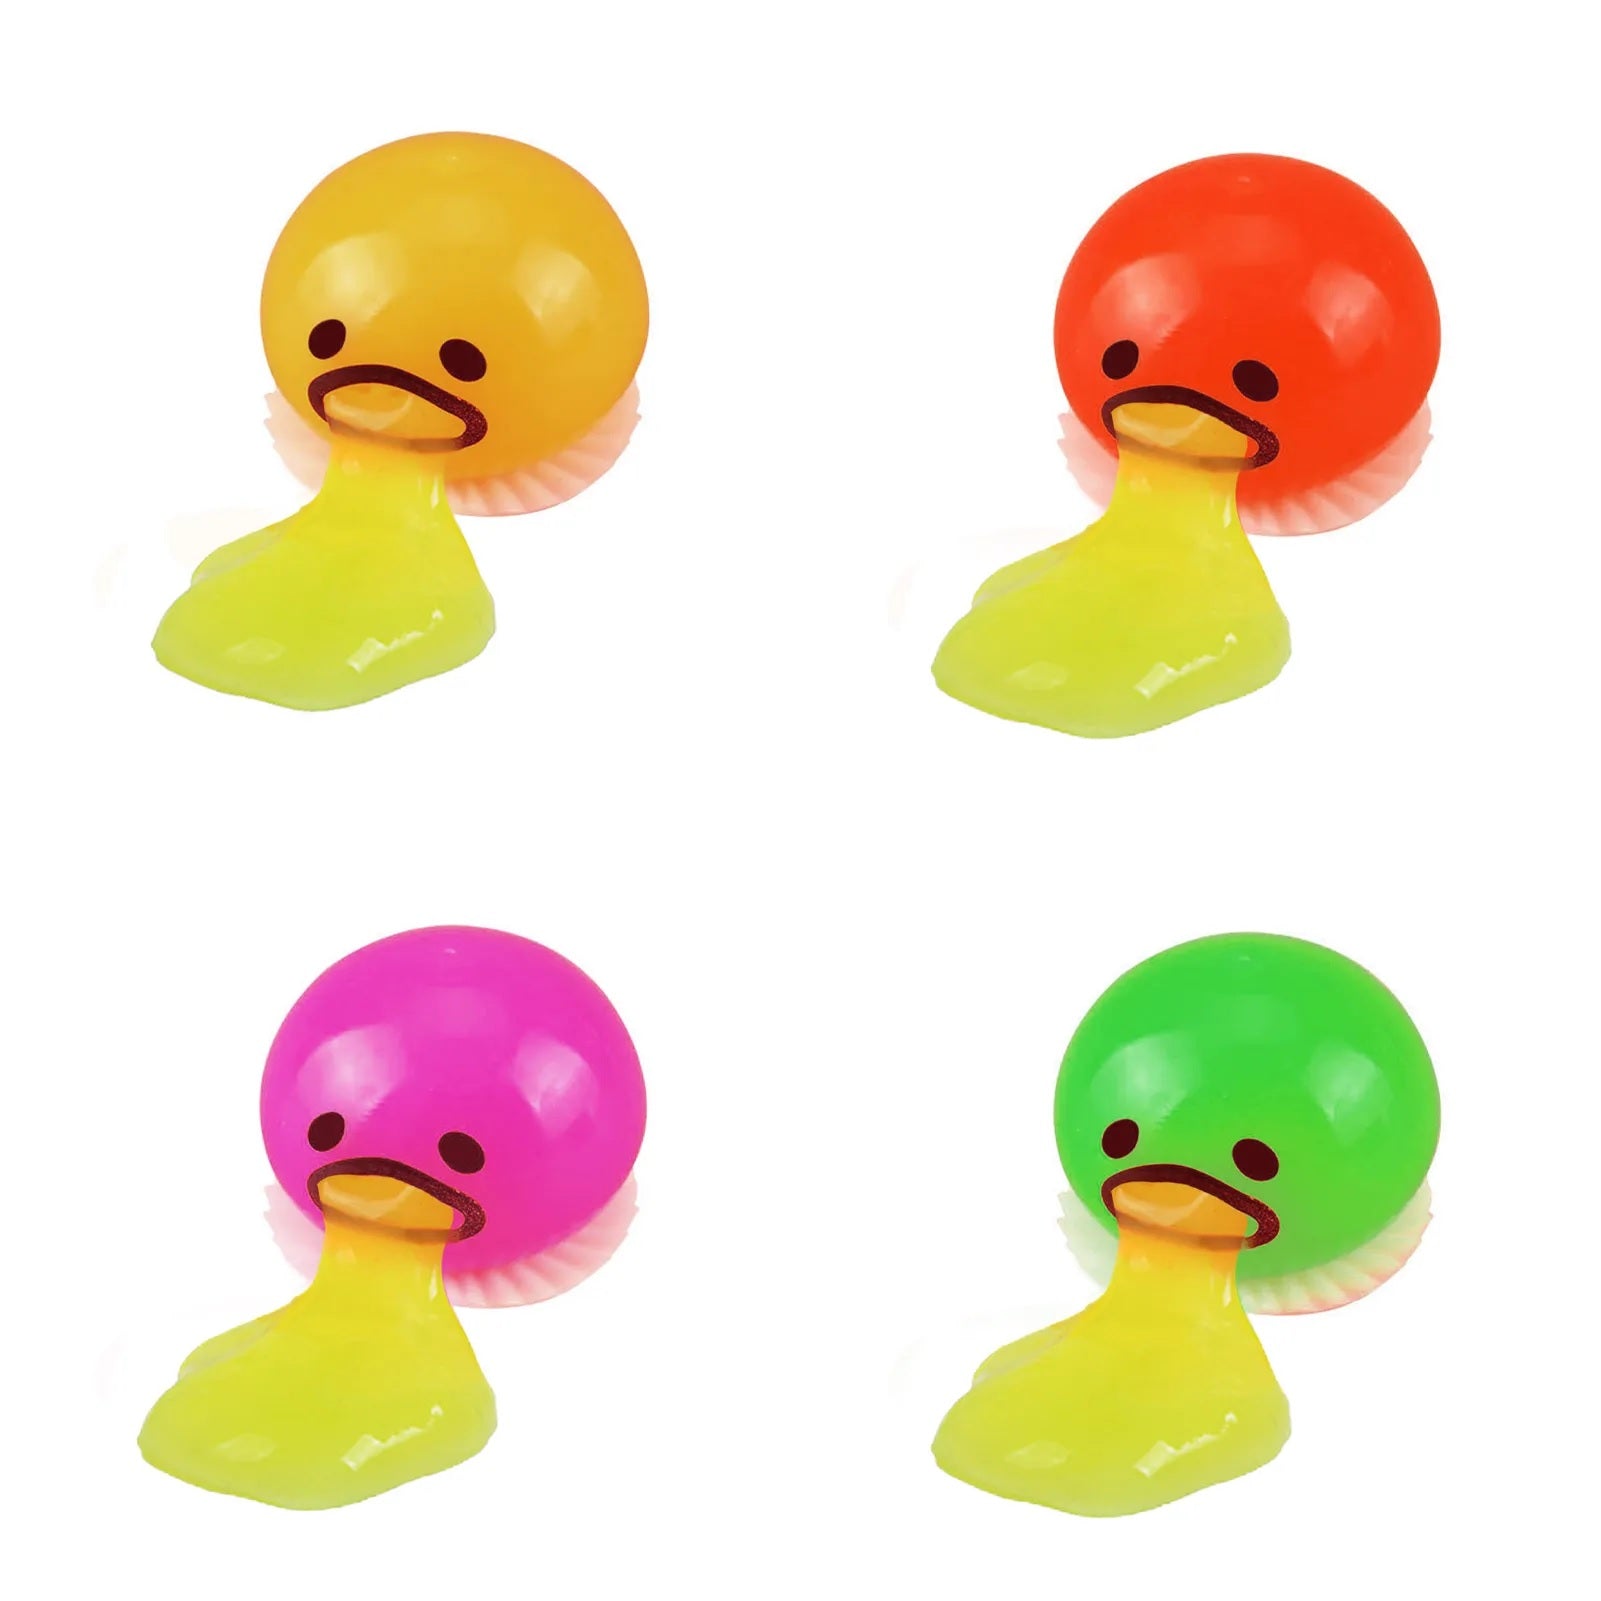 Squishy Puking Egg Yolk Squeeze Ball Yellow Goop Anti-Stress Relief To –  Knick Knack Paddy Wack